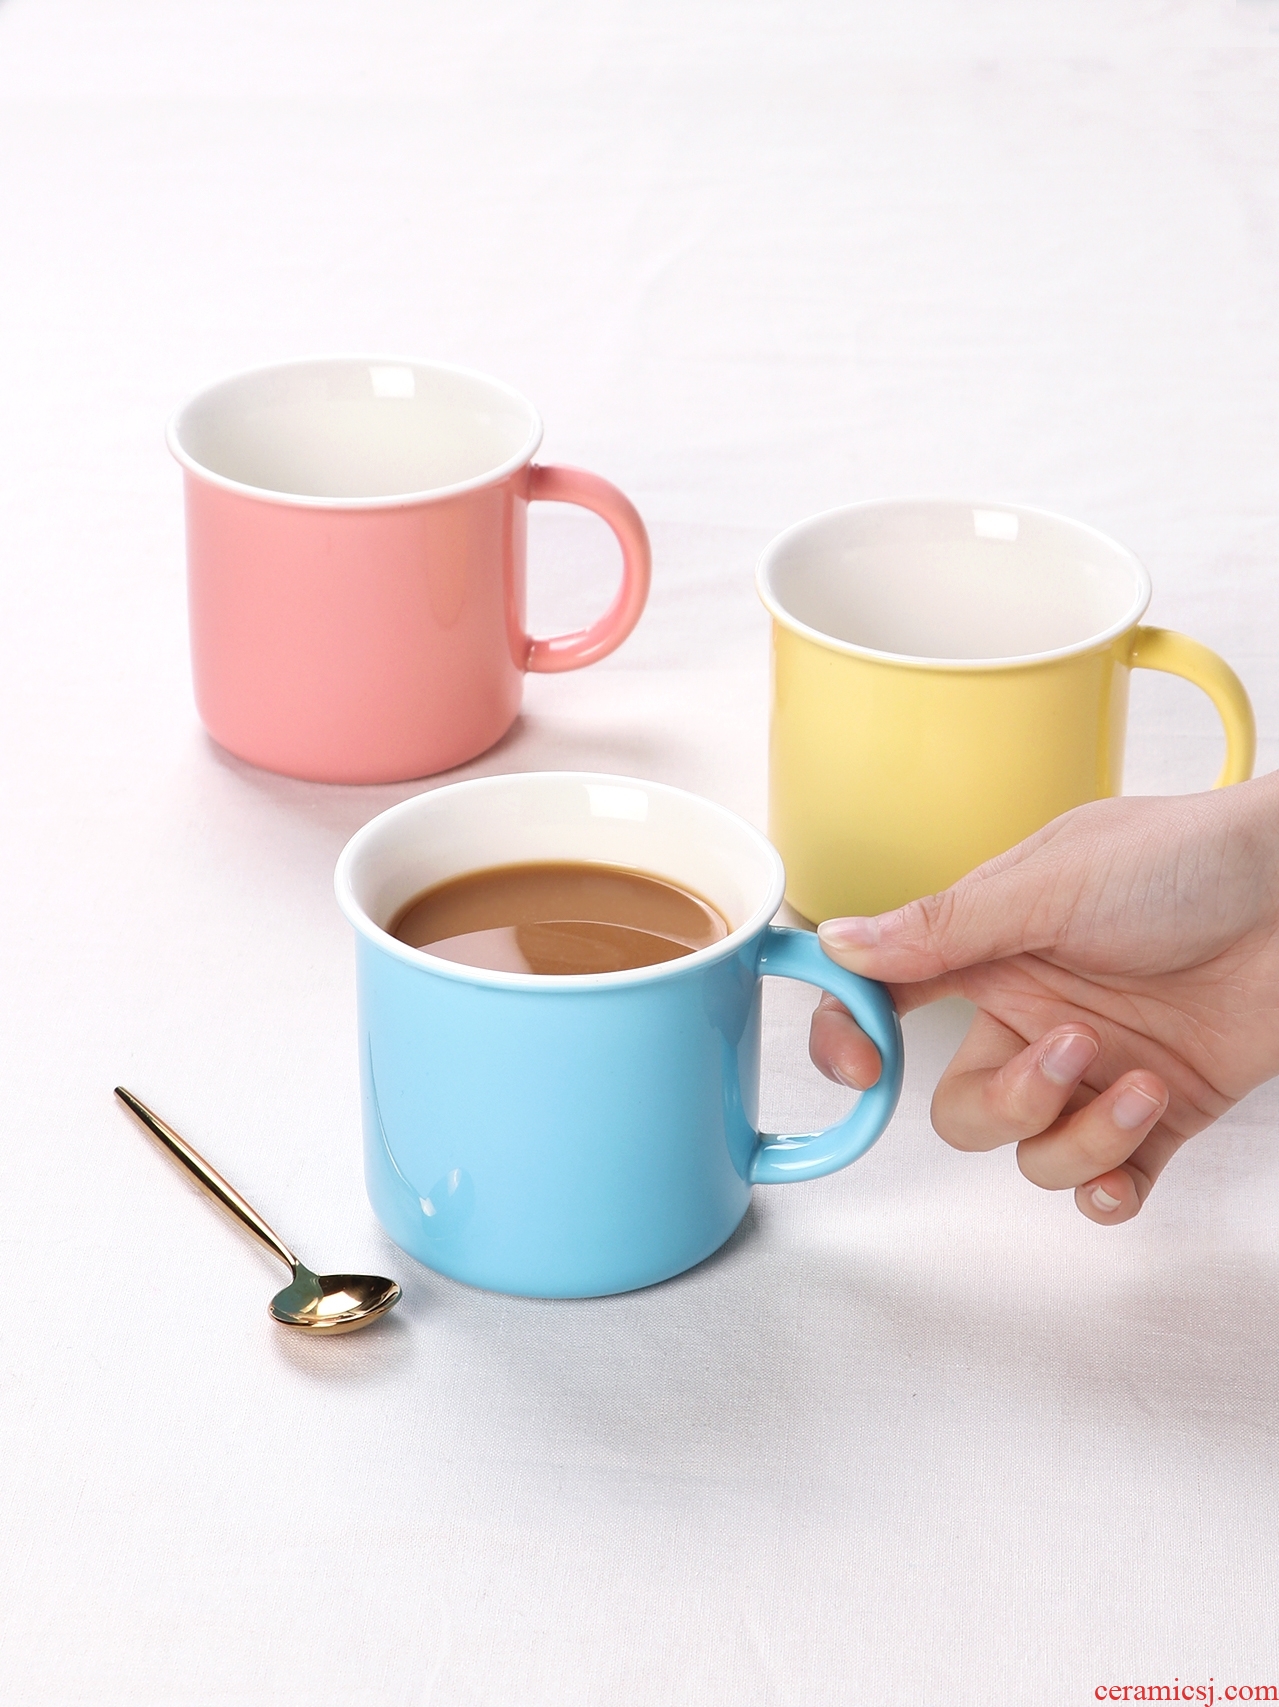 Ceramic mug Nordic ins creative men and women lovers drink a cup of coffee cup enamel cup household personality trend